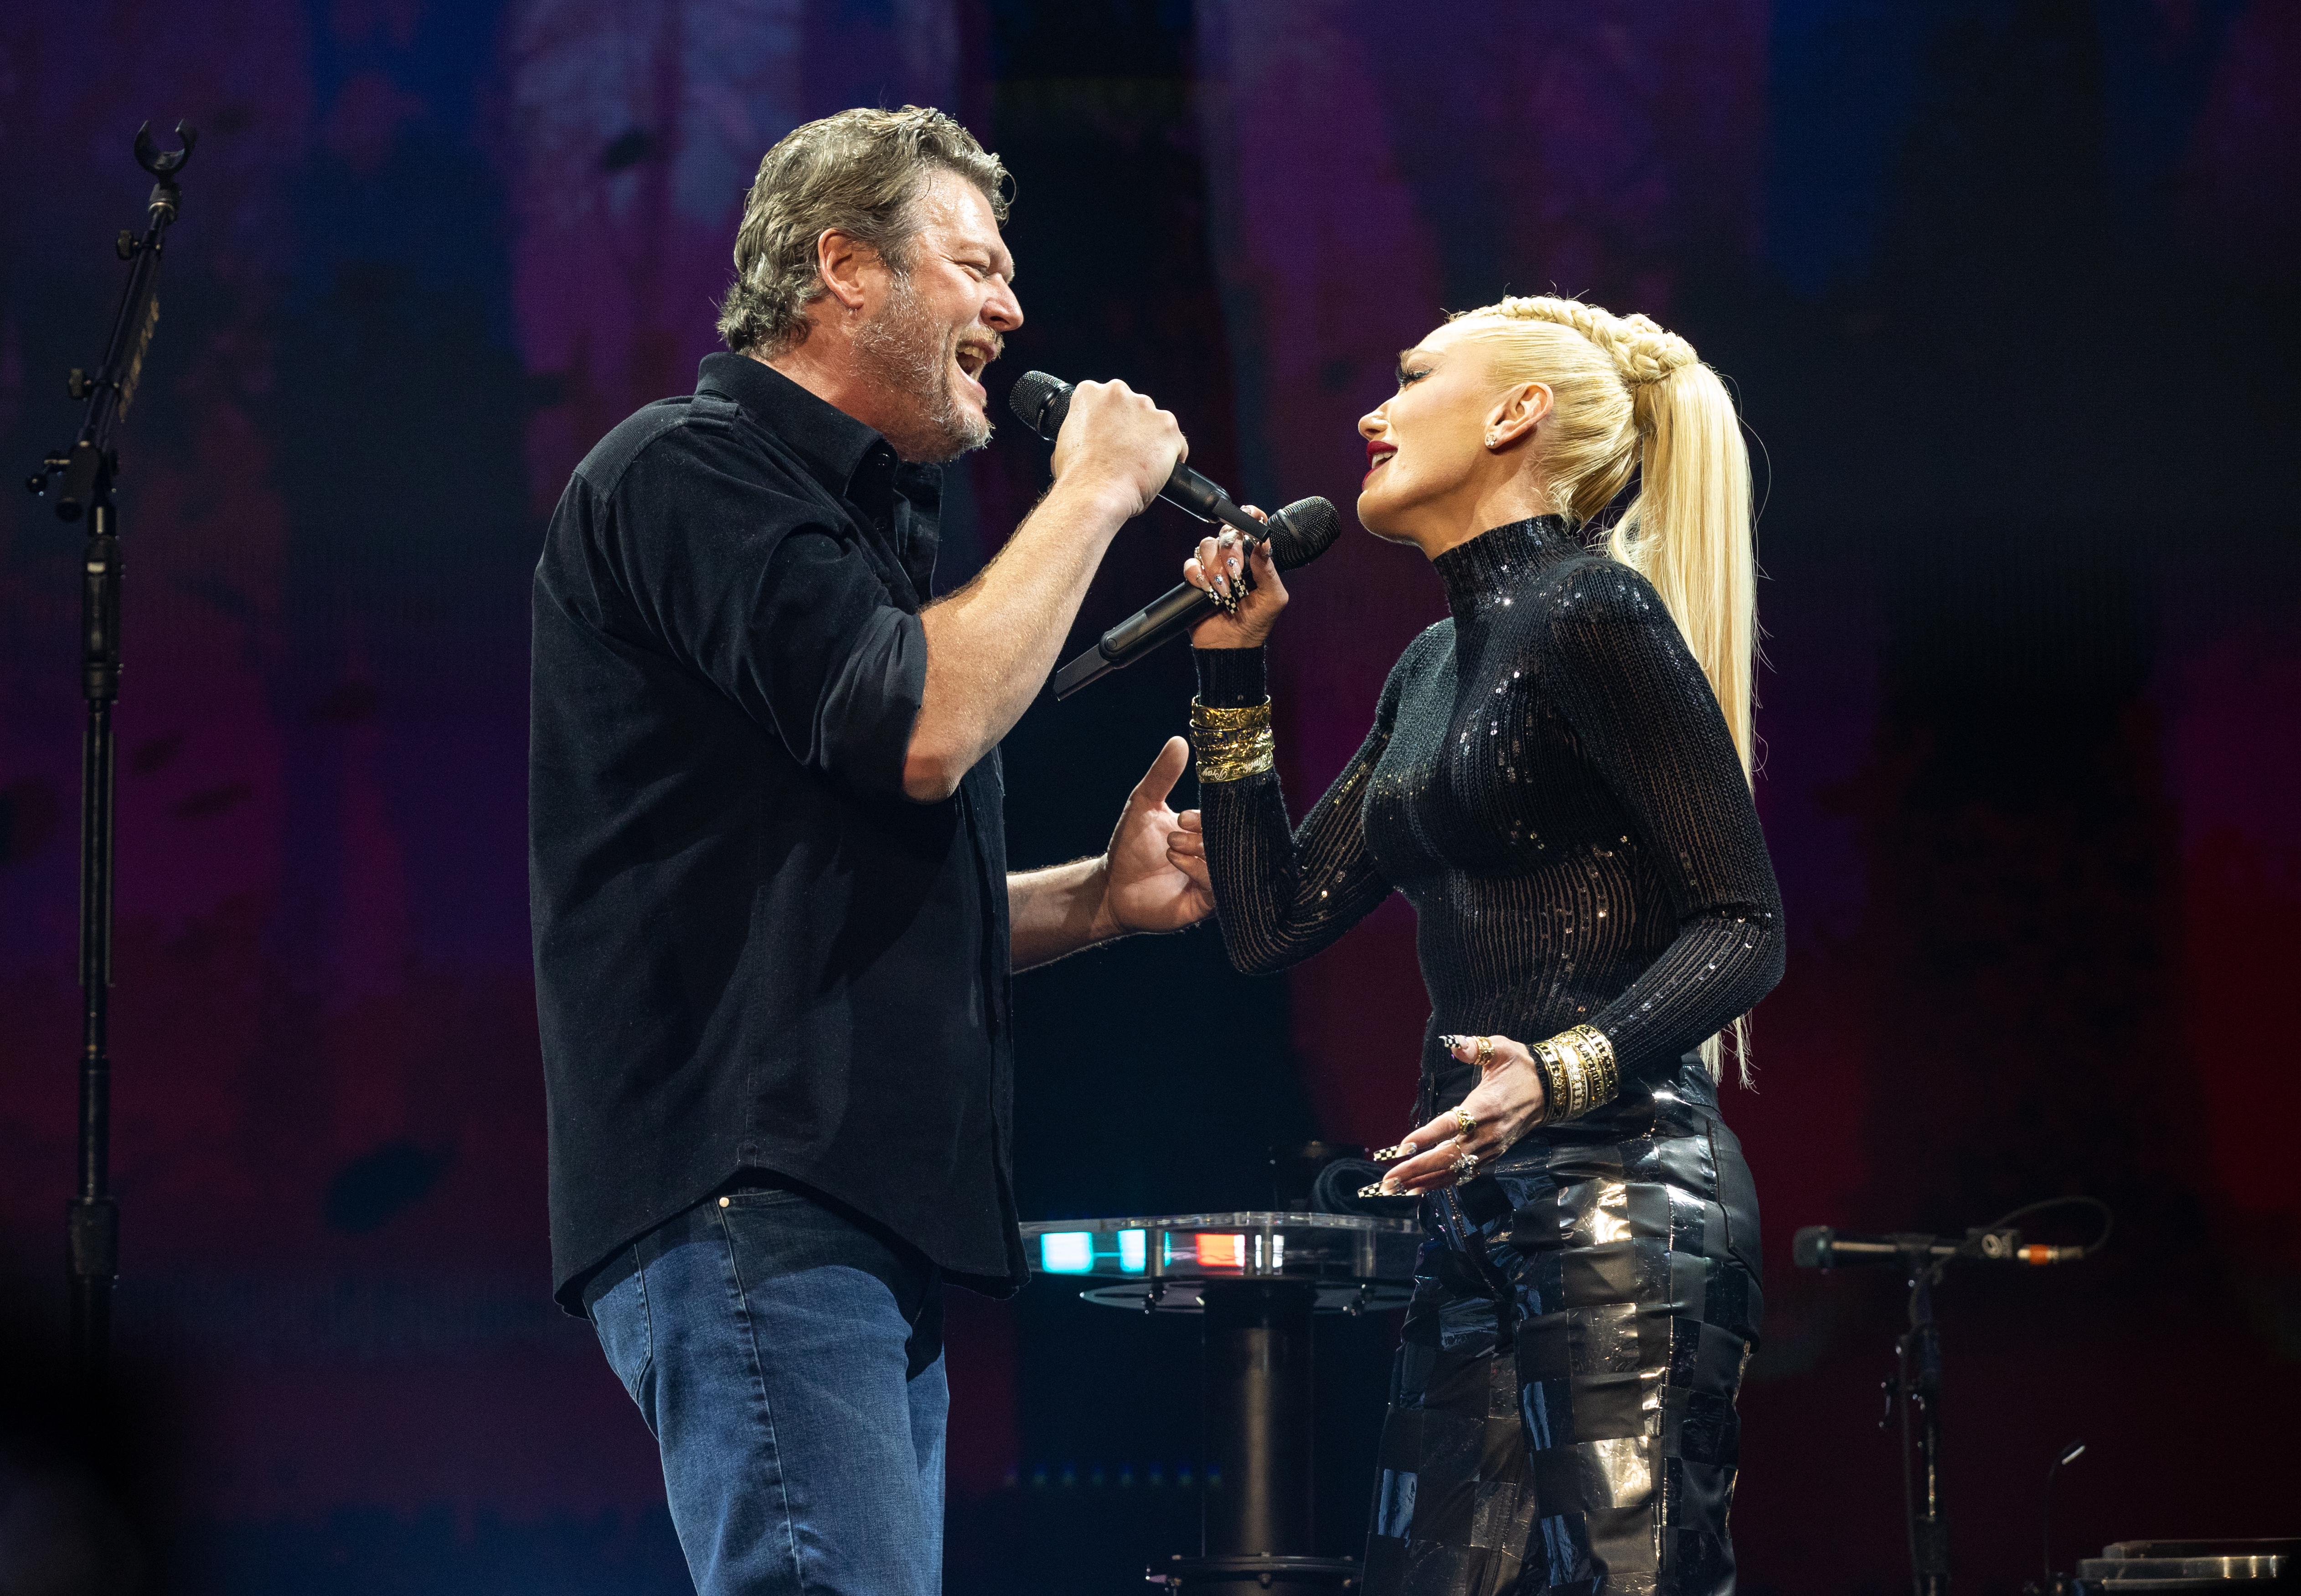 Gwen and Blake squashed rumors in early February by releasing their new love duet, Purple Irises